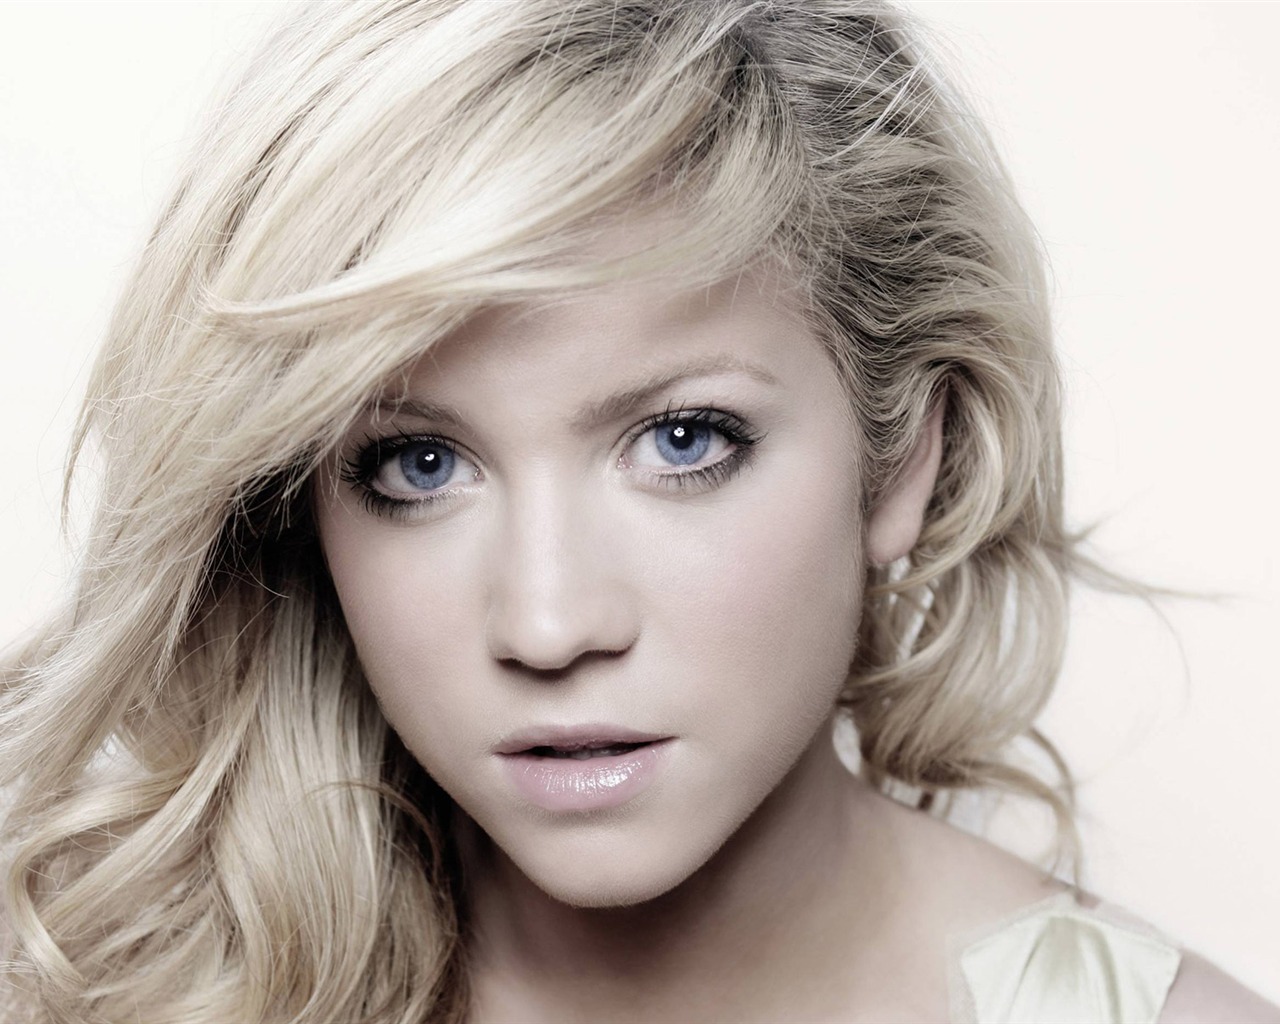 Brittany Snow #012 - 1280x1024 Wallpapers Pictures Photos Images